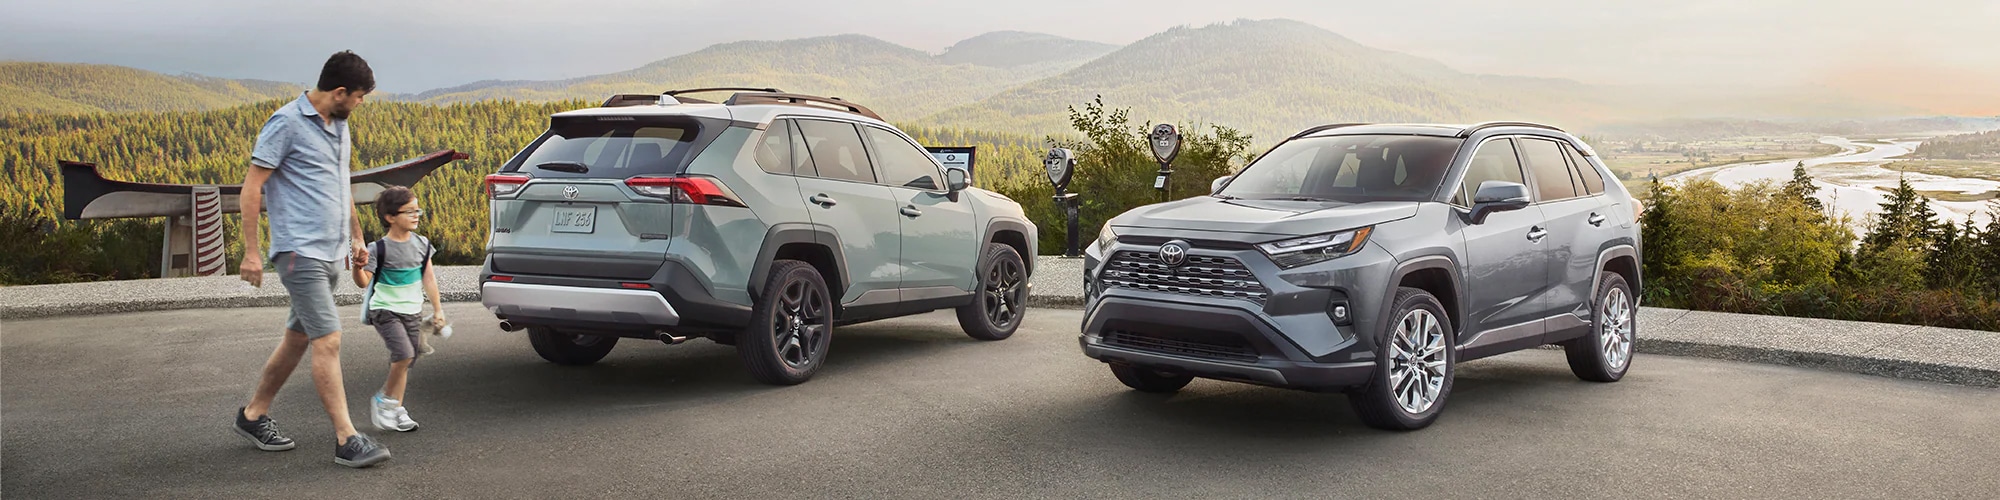 Father and son looking at two New Toyota RAV4 SUVs.